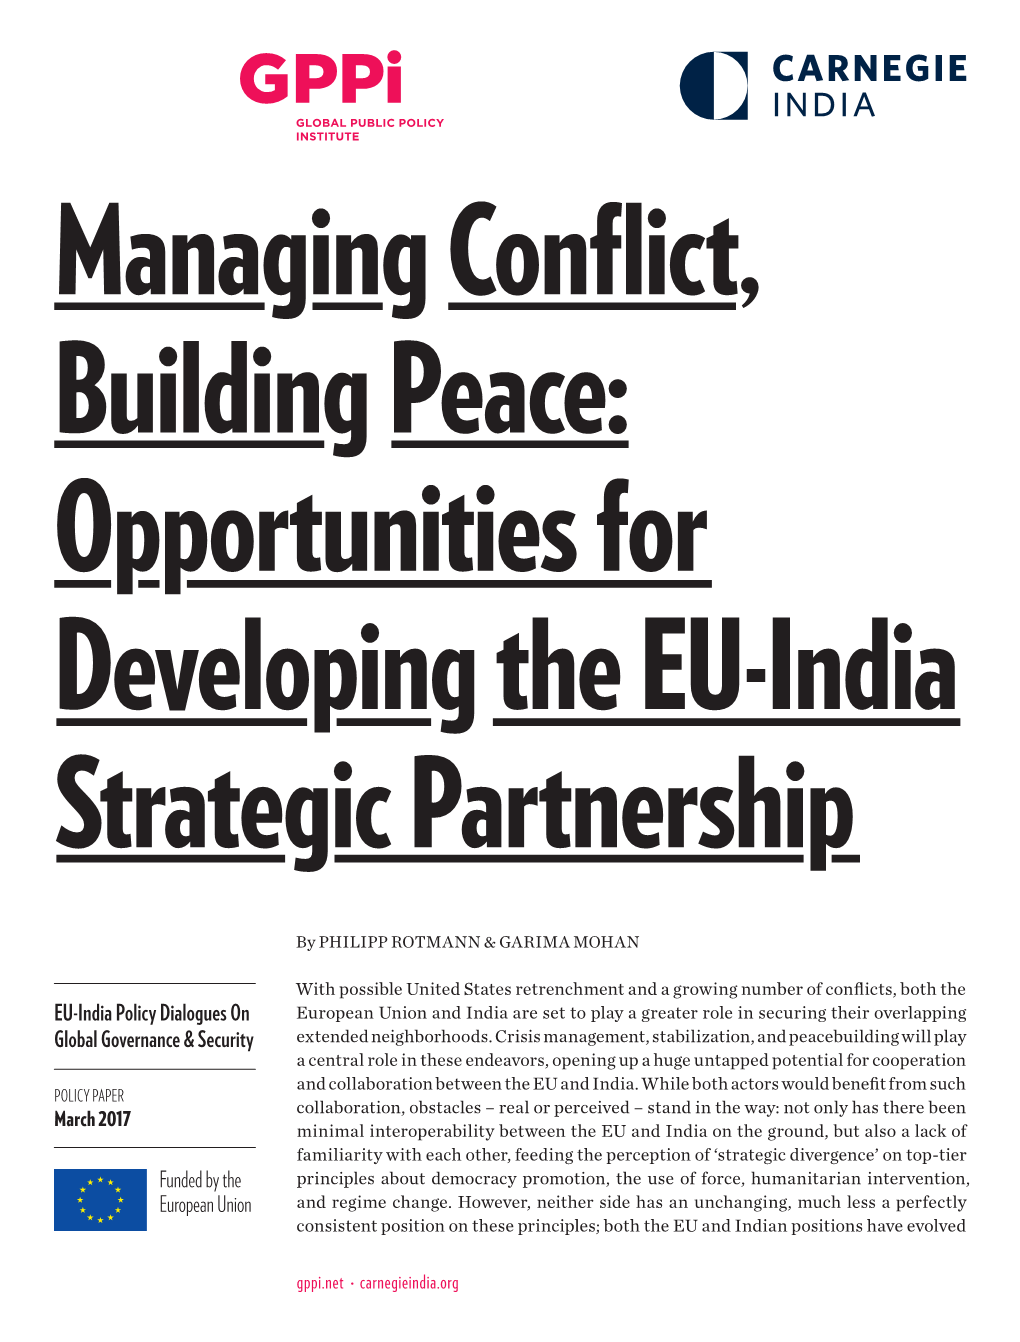 Opportunities for Developing the EU-India Strategic Partnership